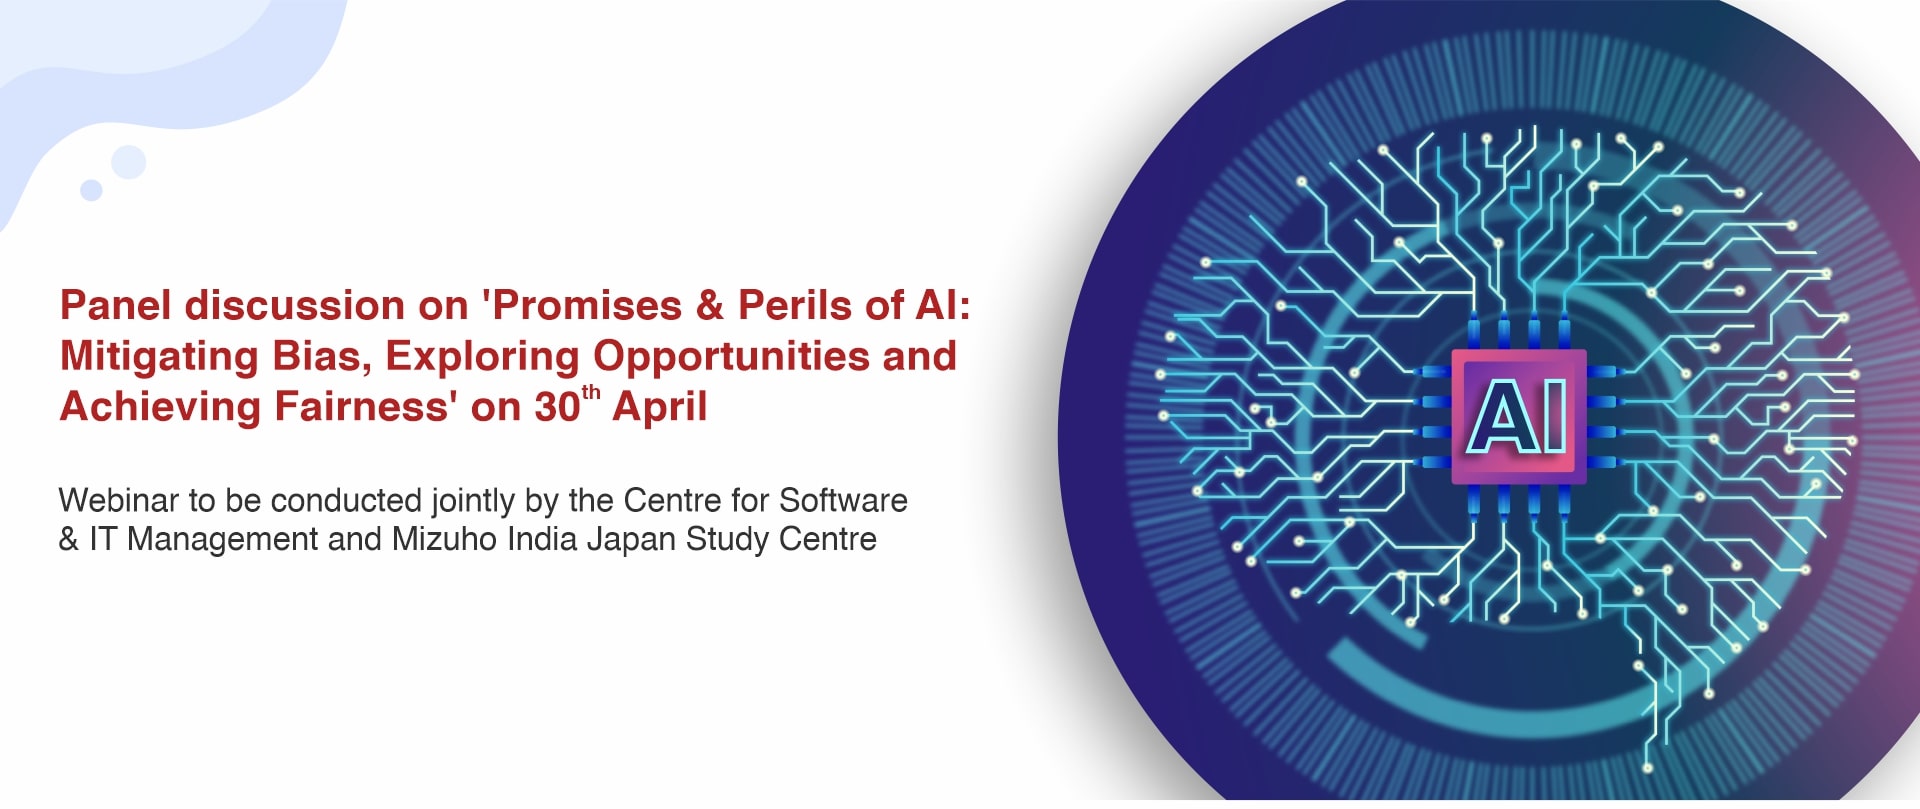 Panel discussion on ‘Promises & Perils of AI: Mitigating Bias, Exploring Opportunities and Achieving Fairness’ on 30th April 